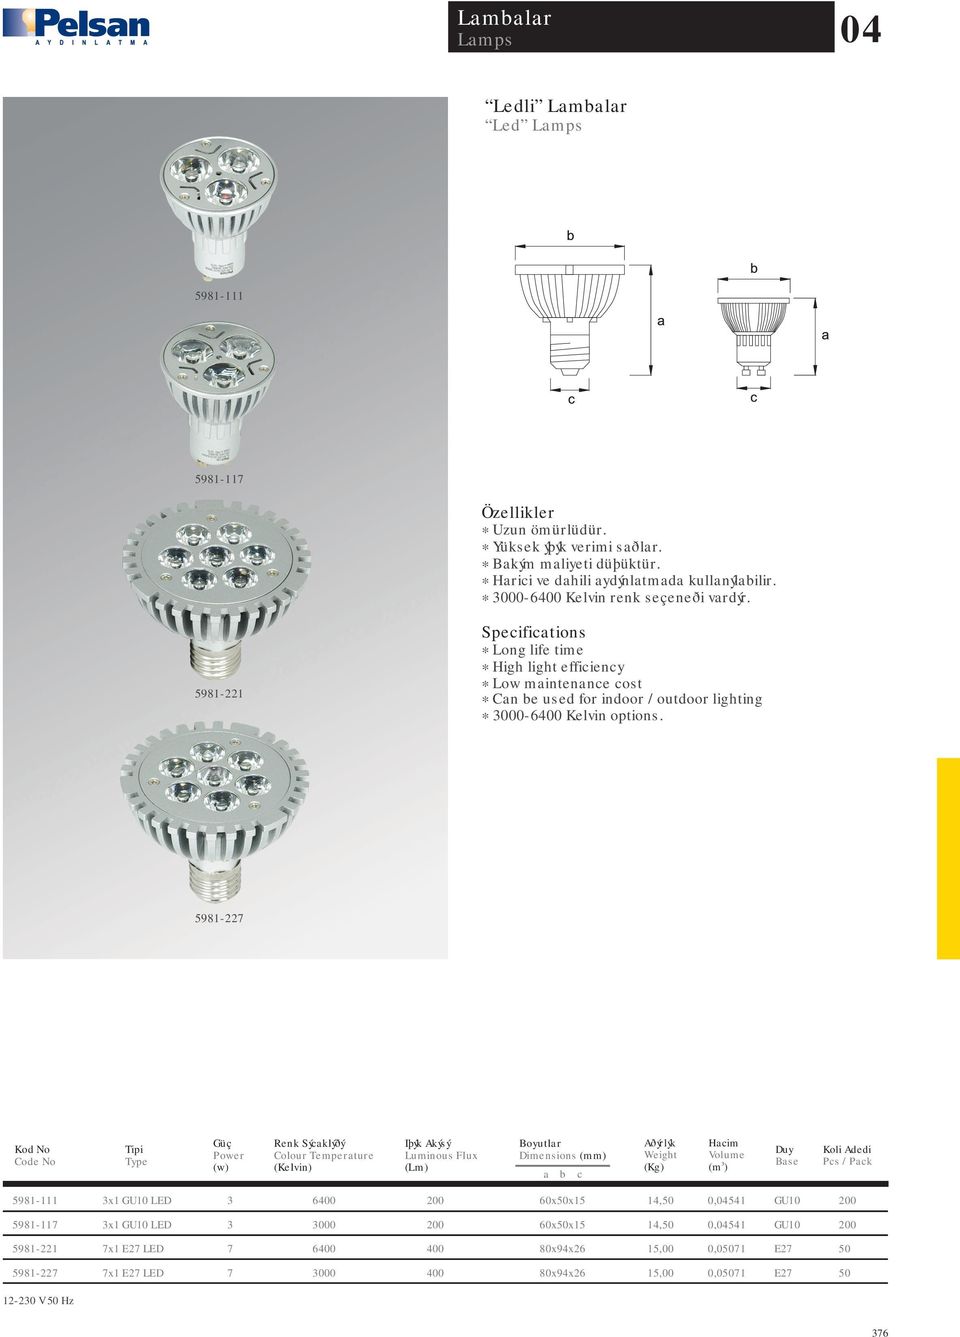 5981-221 * High light efficiency * Low maintenance cost * Can be used for indoor / outdoor lighting * 3000- Kelvin options.